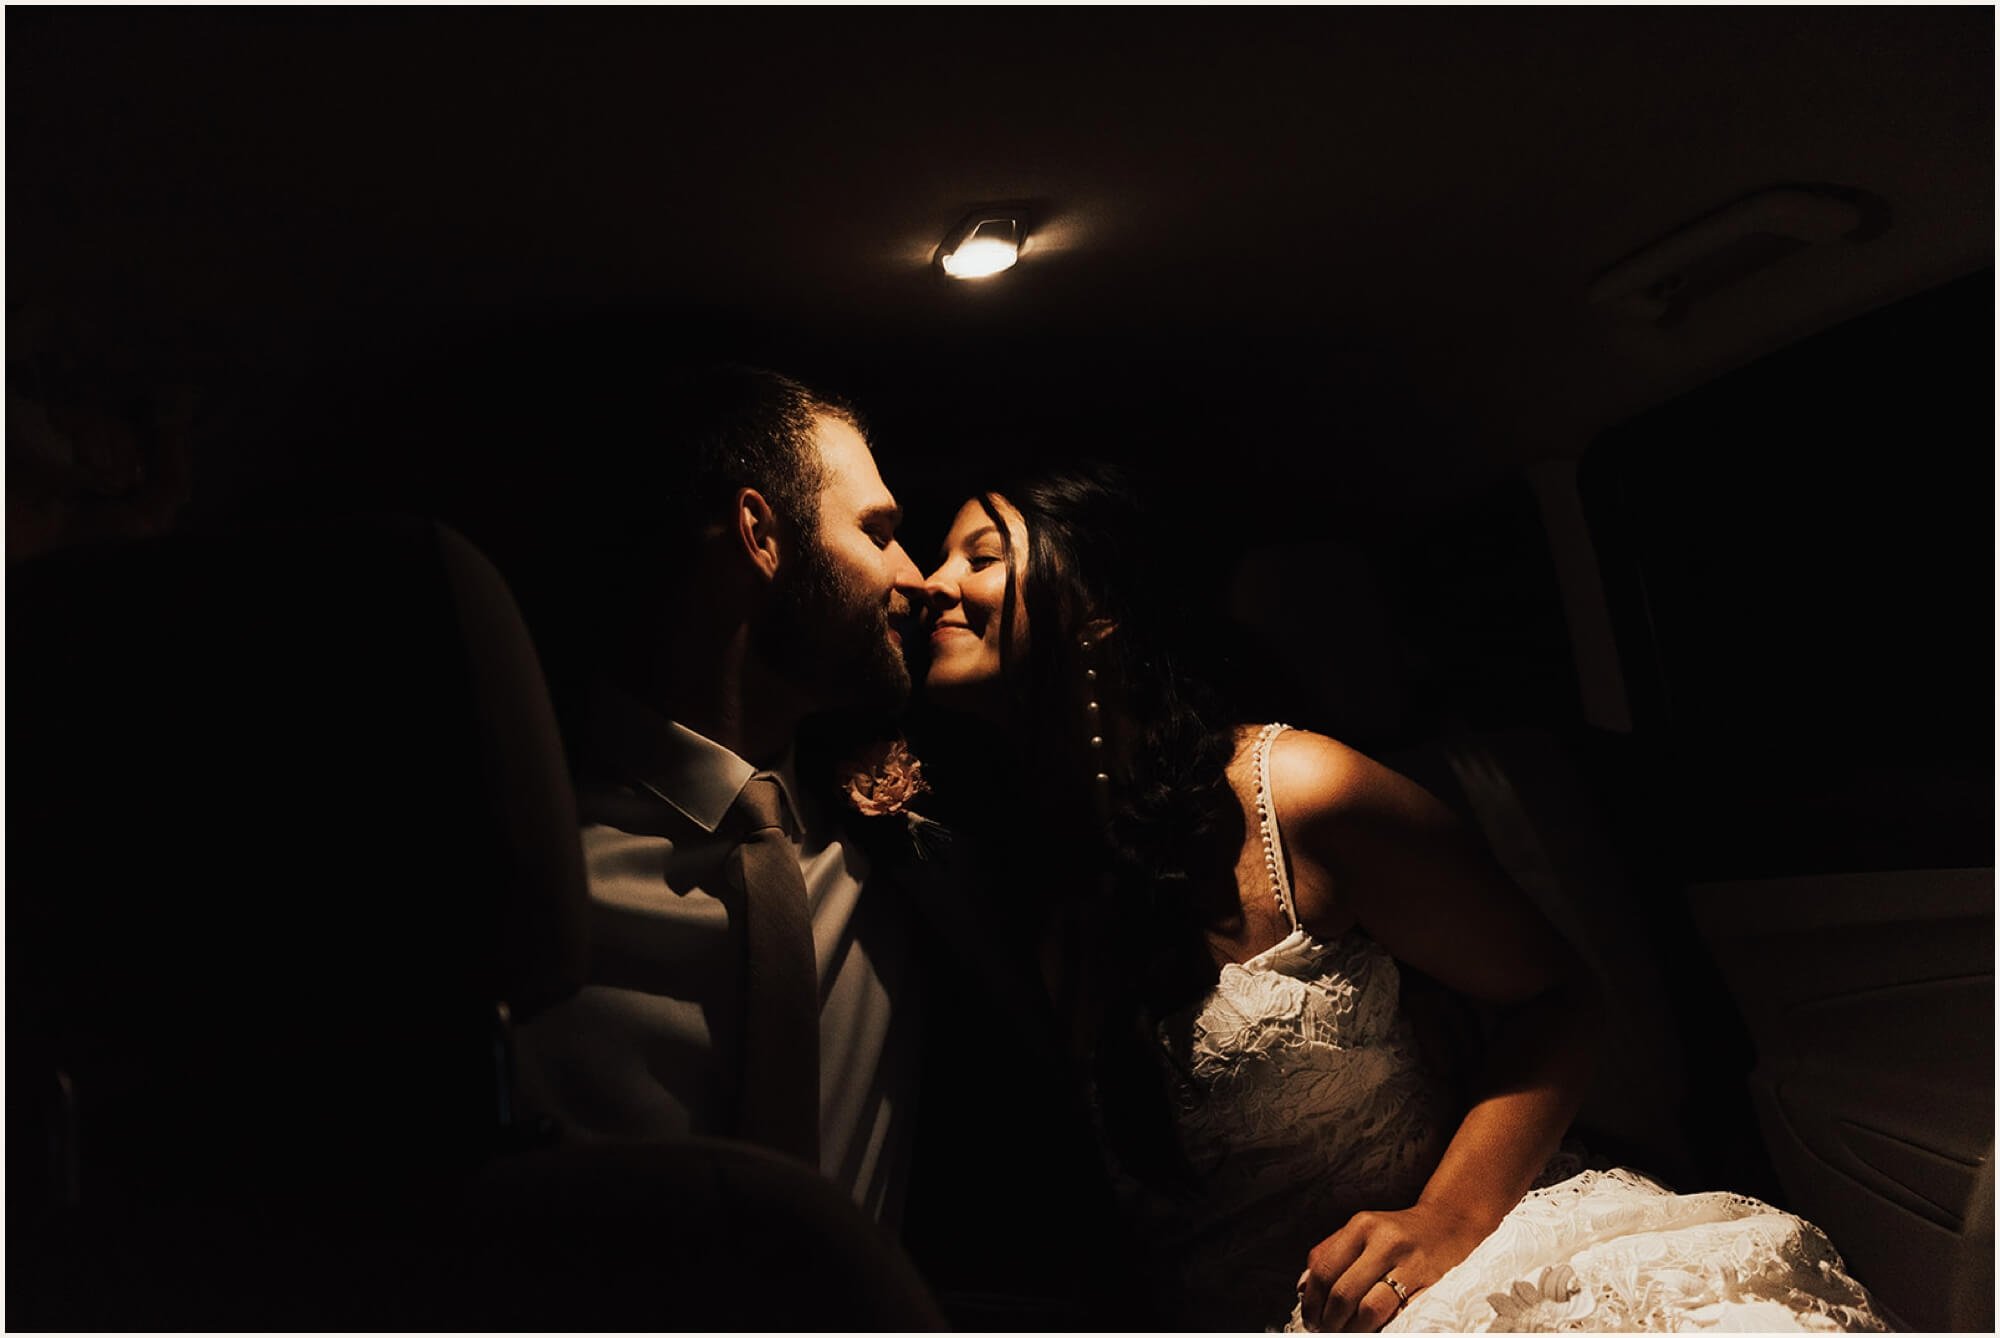 Bride and groom kissing in the car